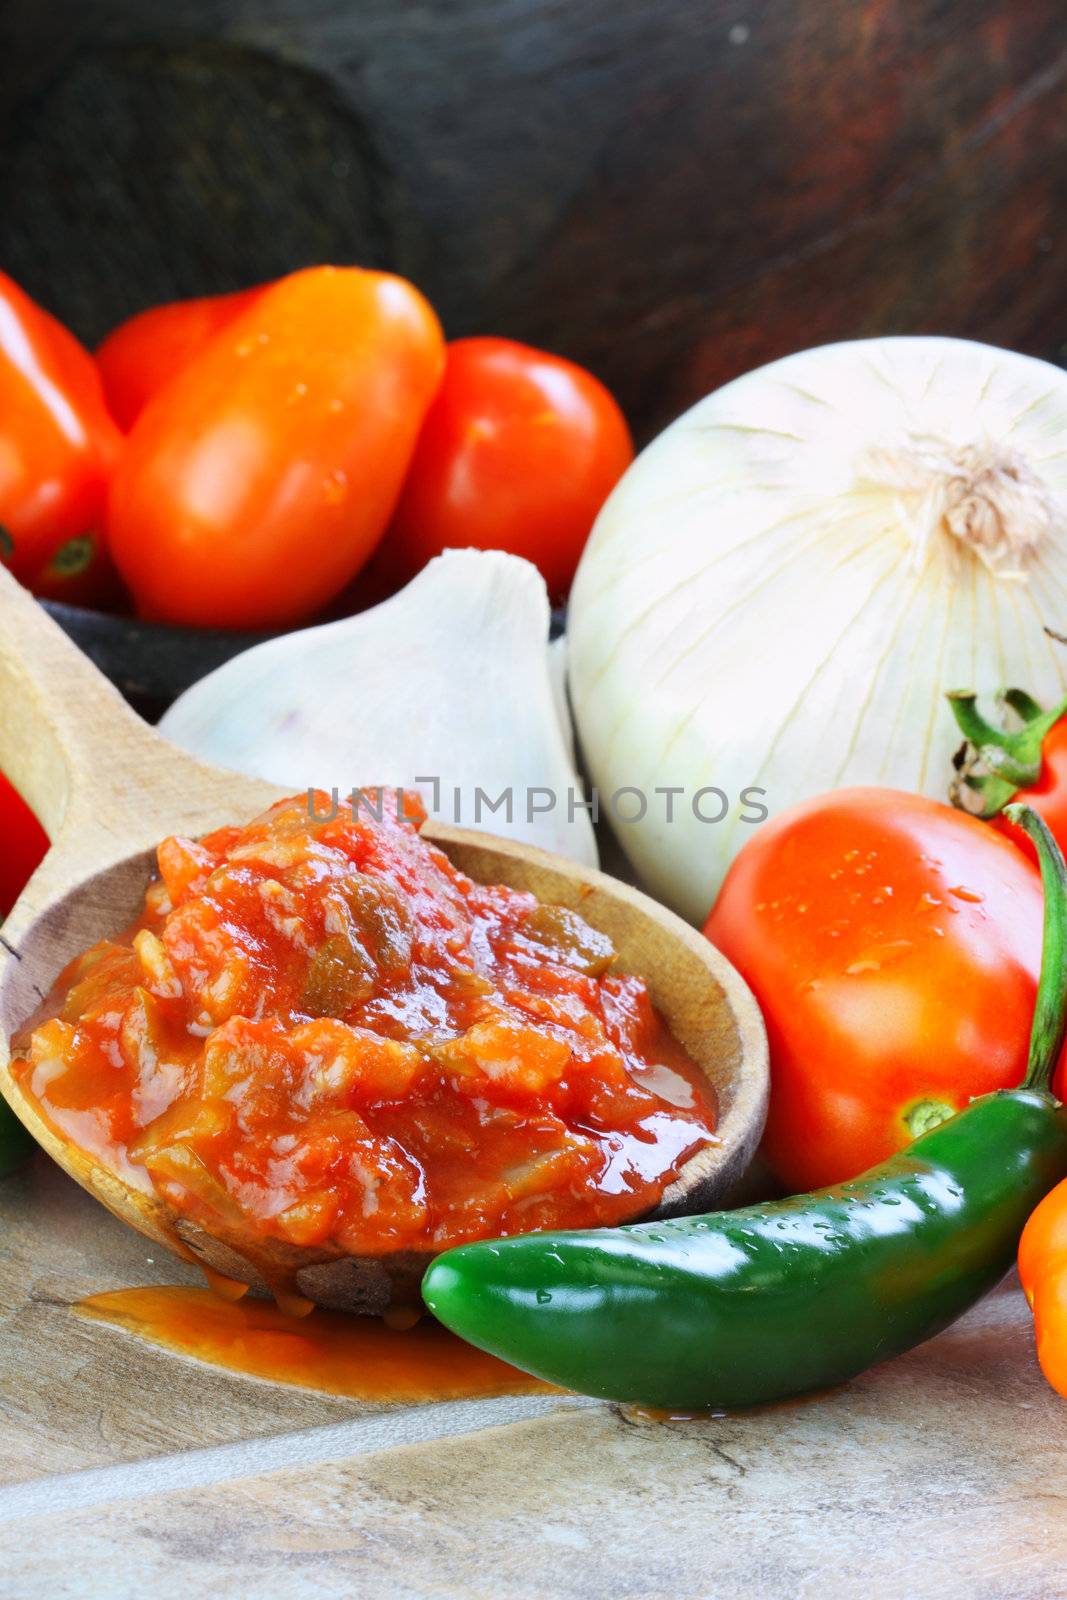 Rustic wooden spoon filled with spicy fresh salsa, surrounded by freshly picked and washed ingredients spilling from an old wooden bowl.